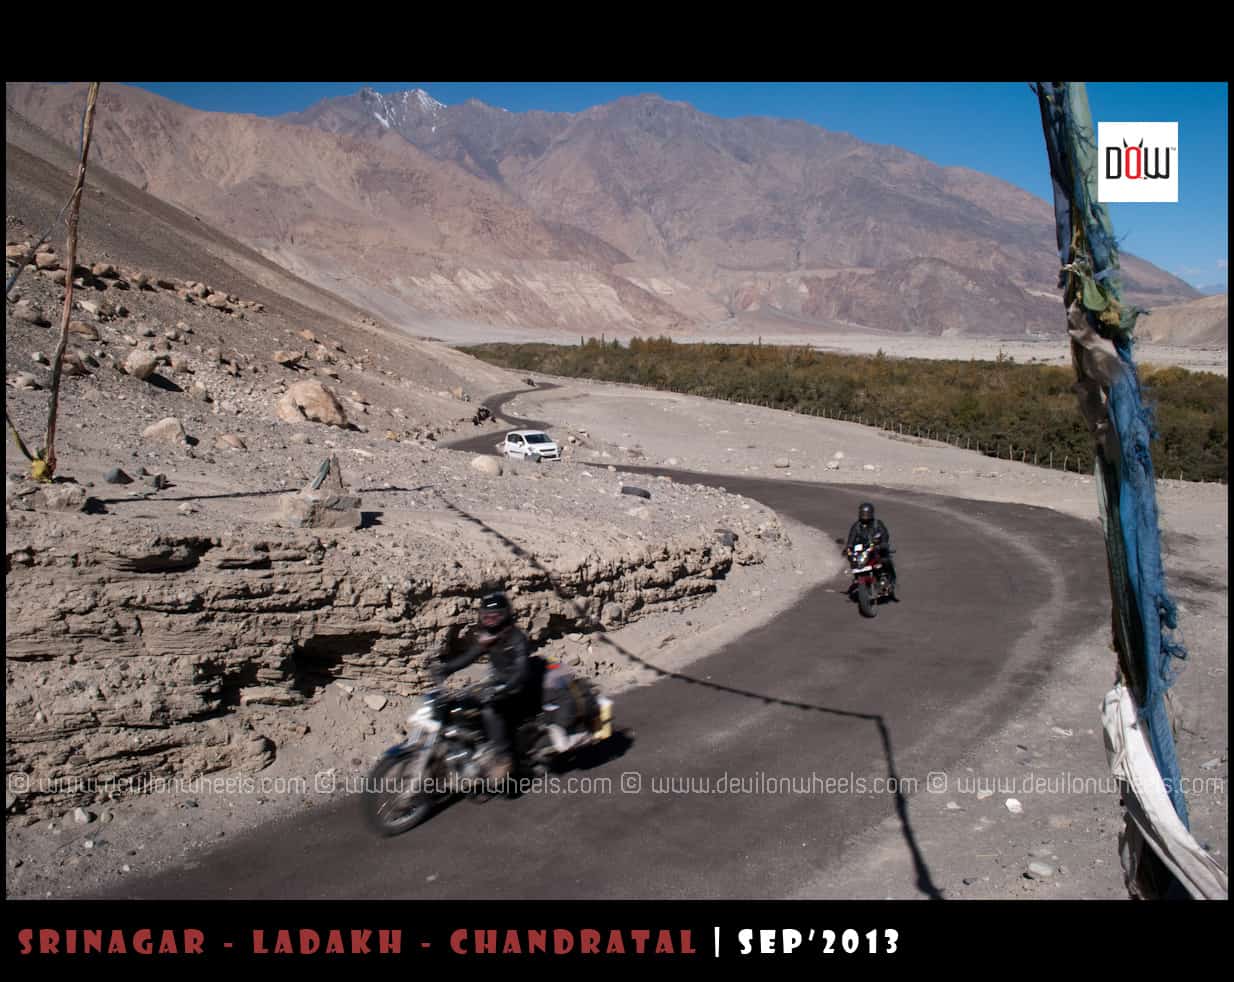 Are outside rented bikes allowed in Leh - Ladakh?